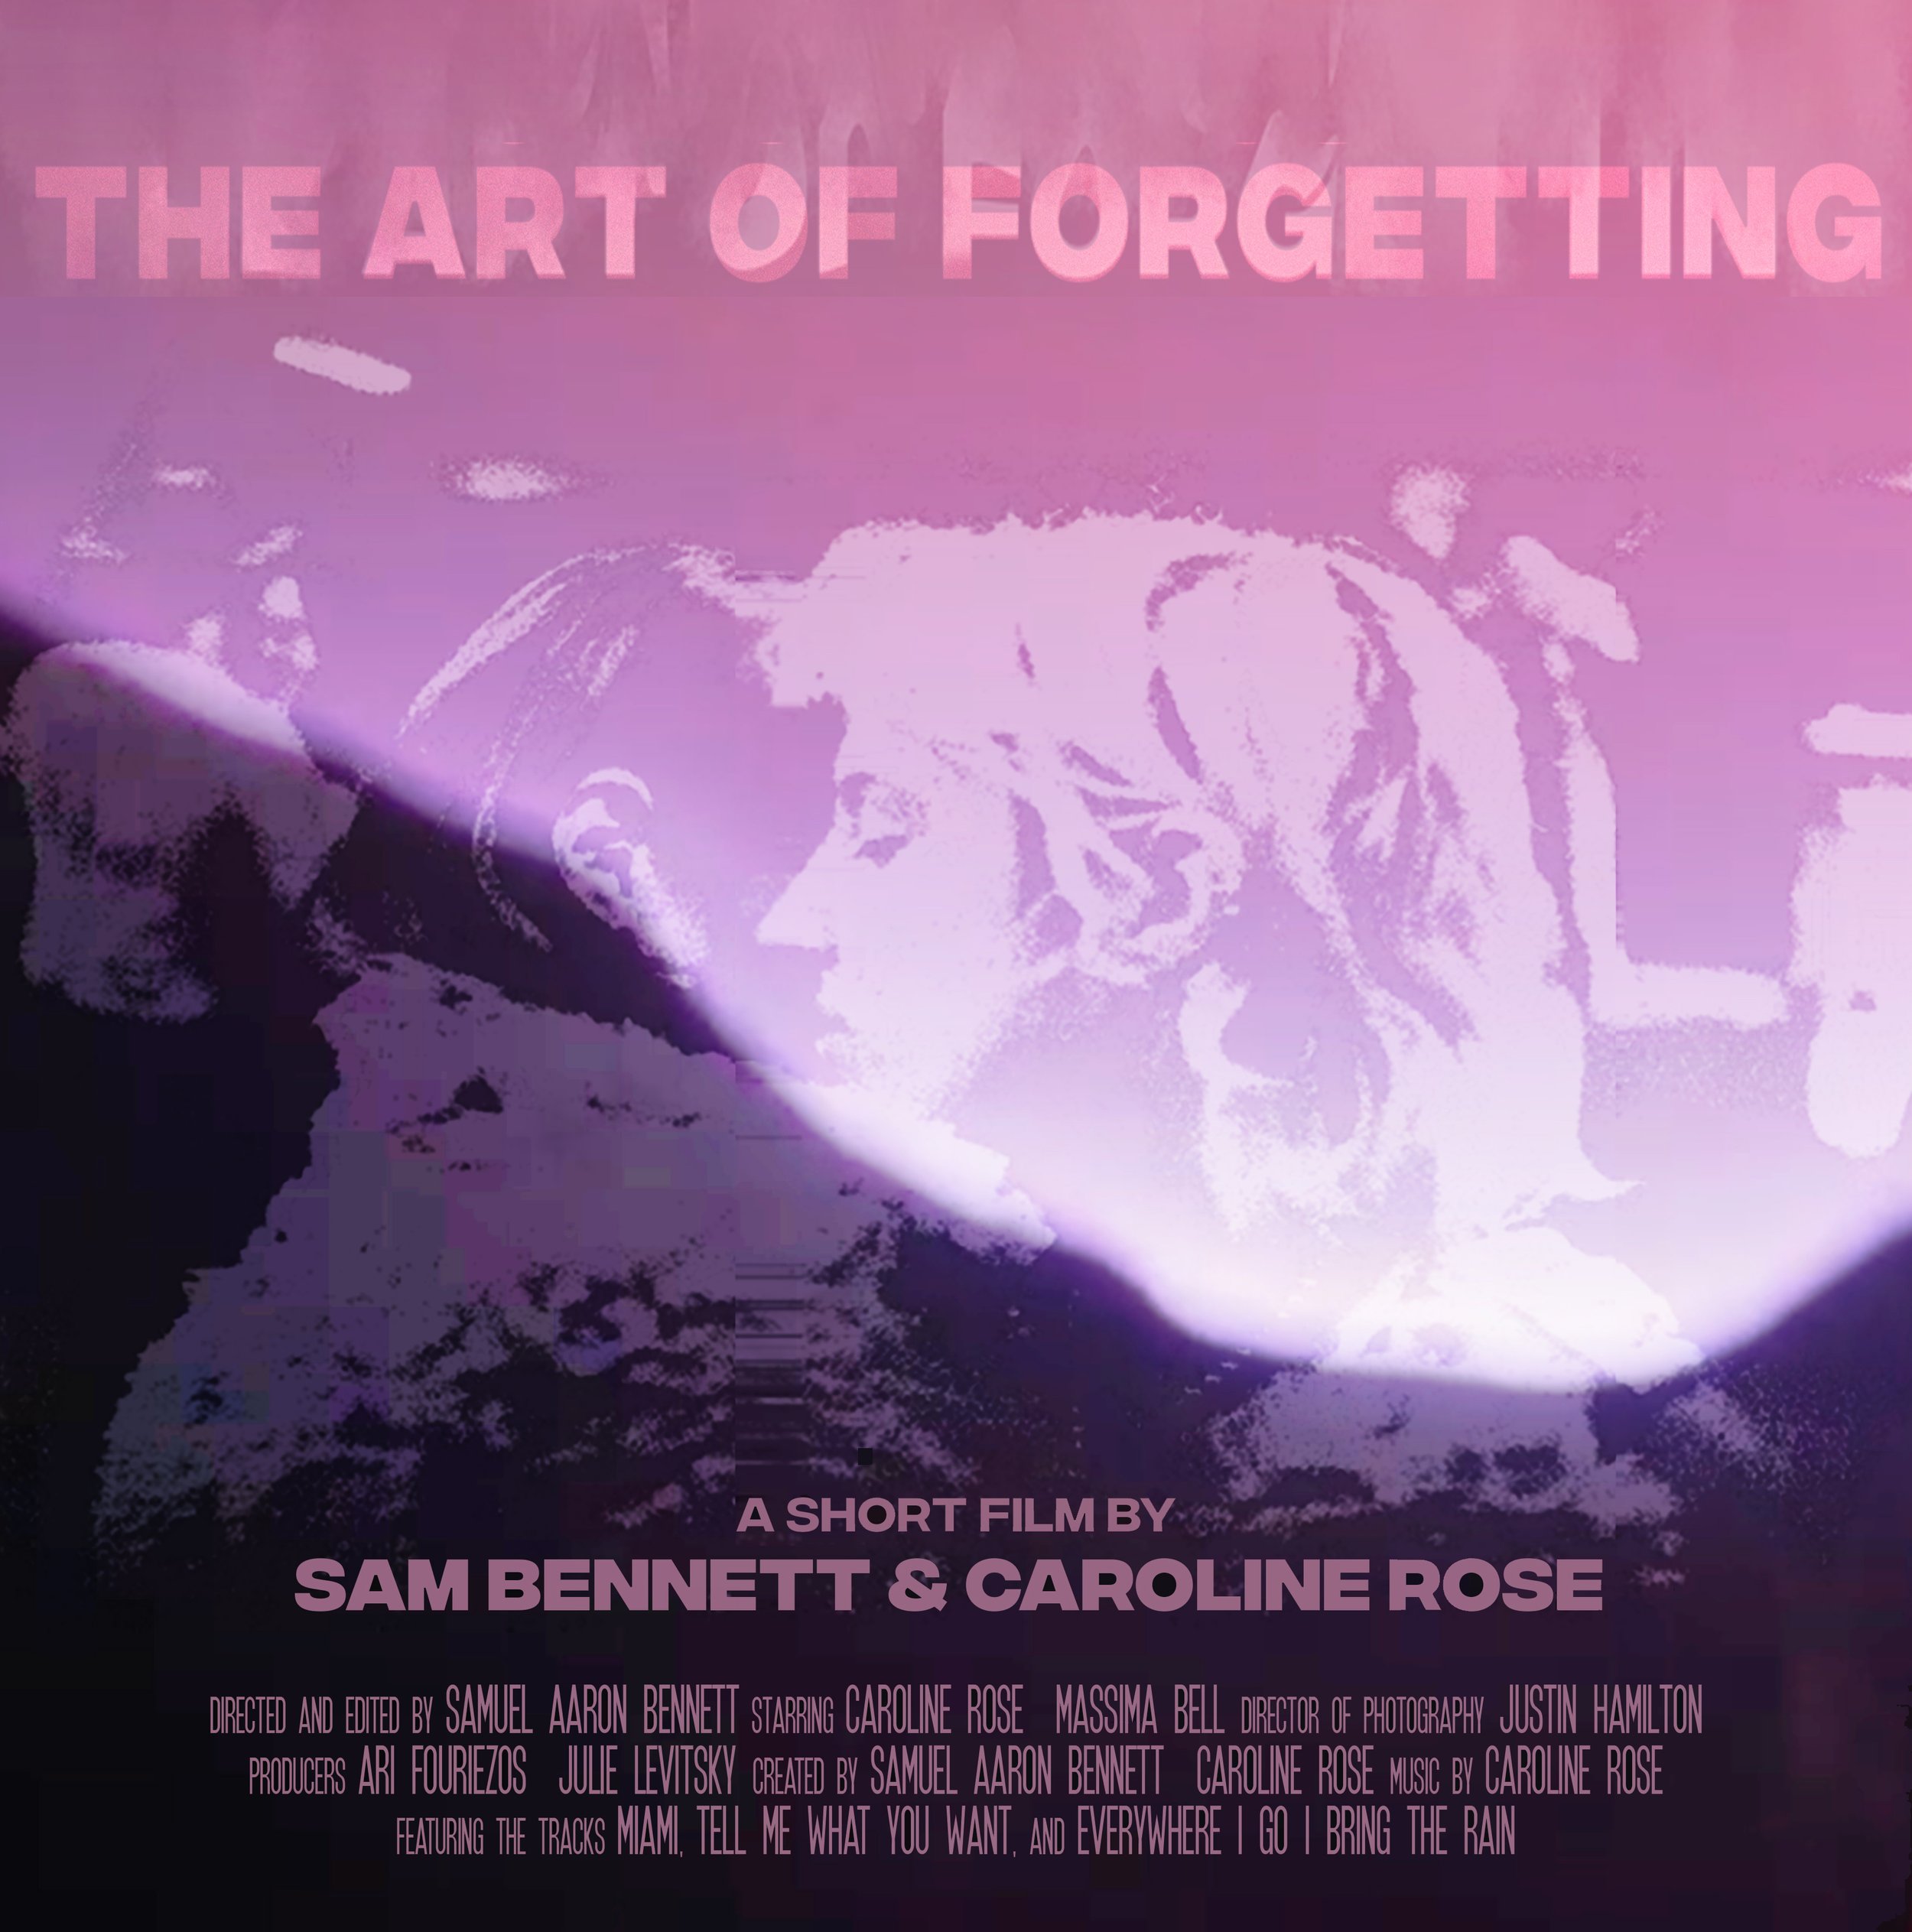 Caroline Rose - The Art of Forgetting